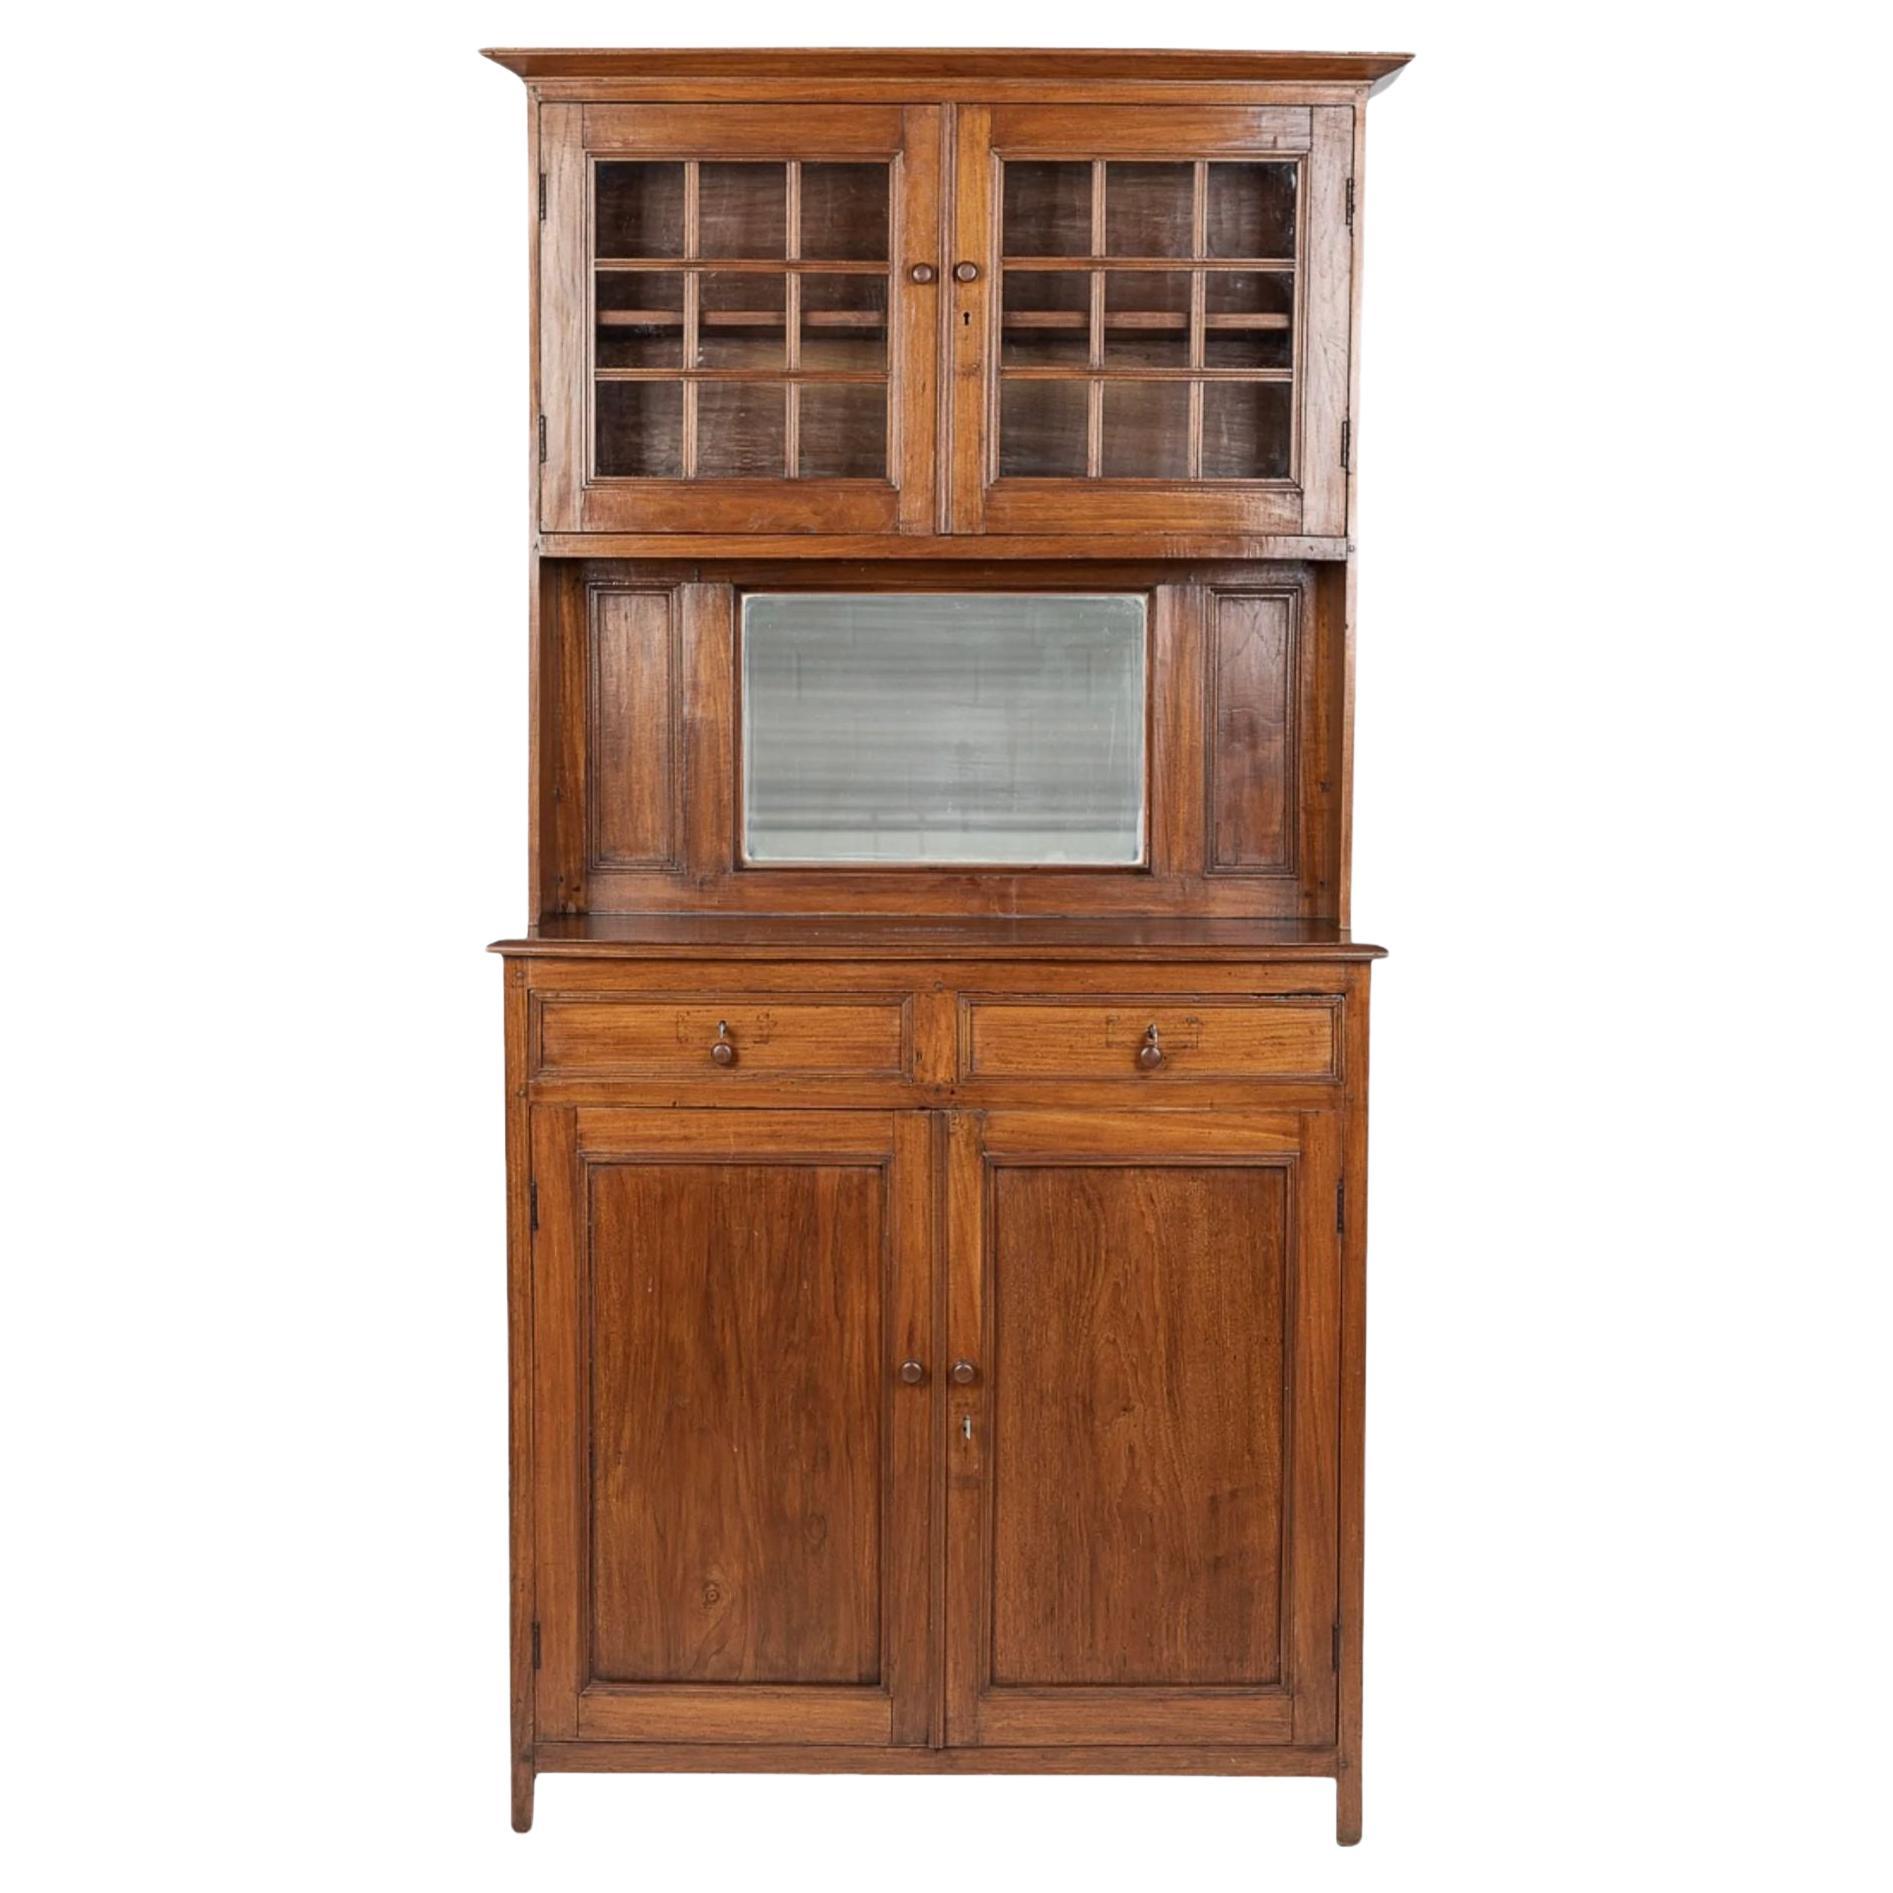 Antique American Wooden Cupboard Storage Cabinet, Late 1800s For Sale